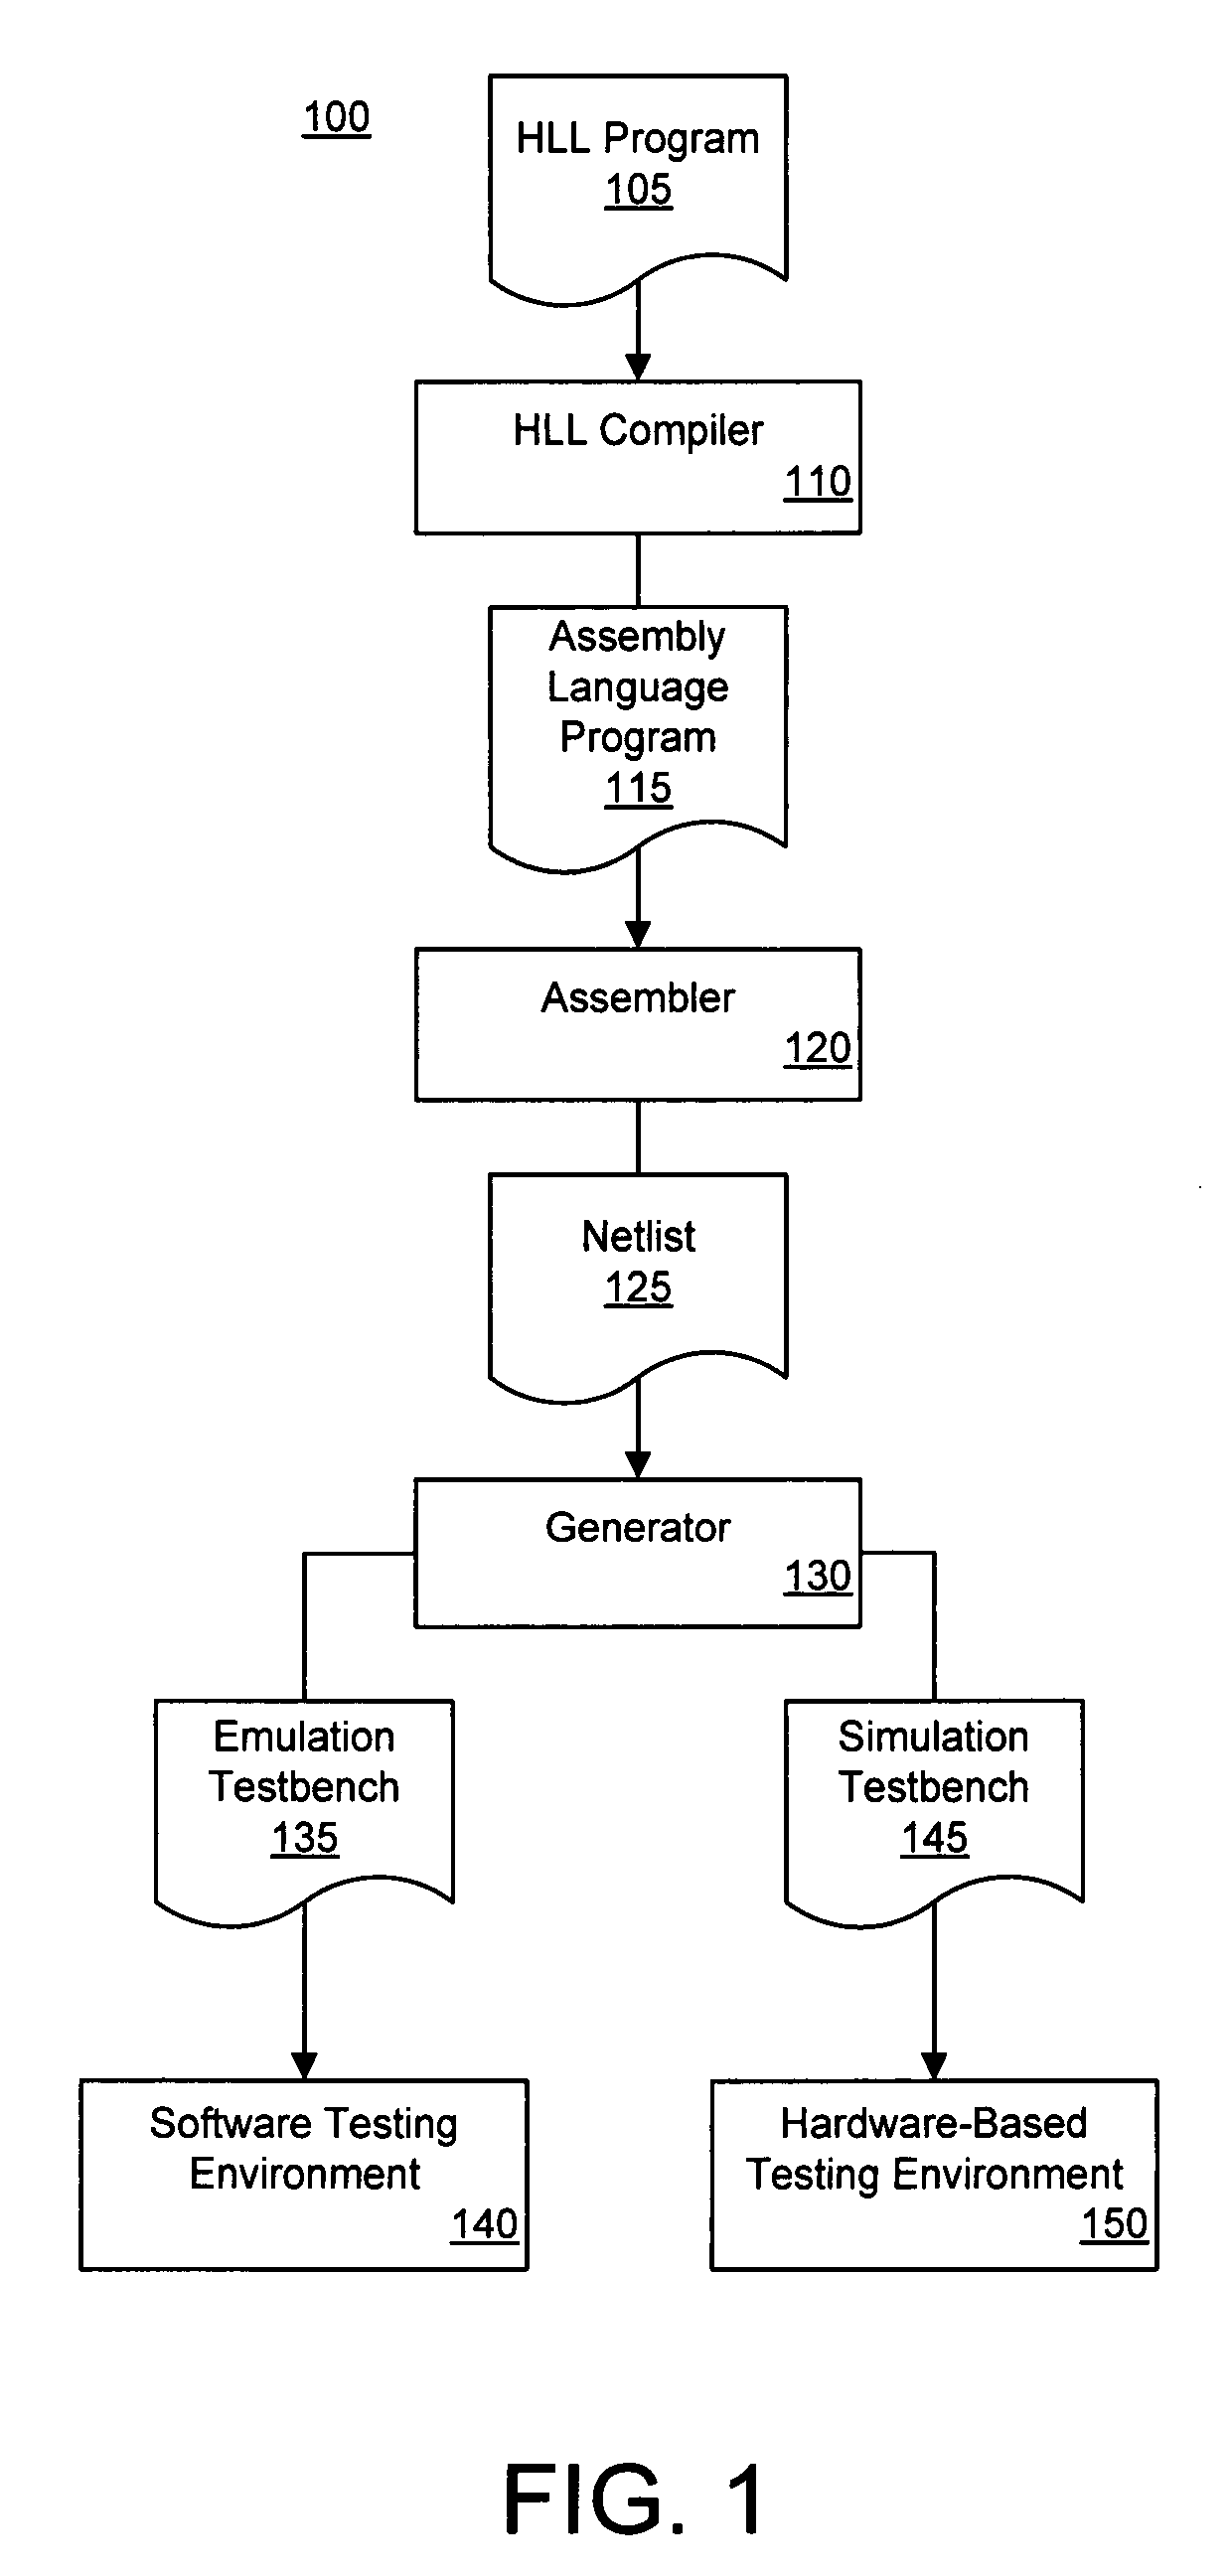 Profiling a hardware system generated by compiling a high level language onto a programmable logic device